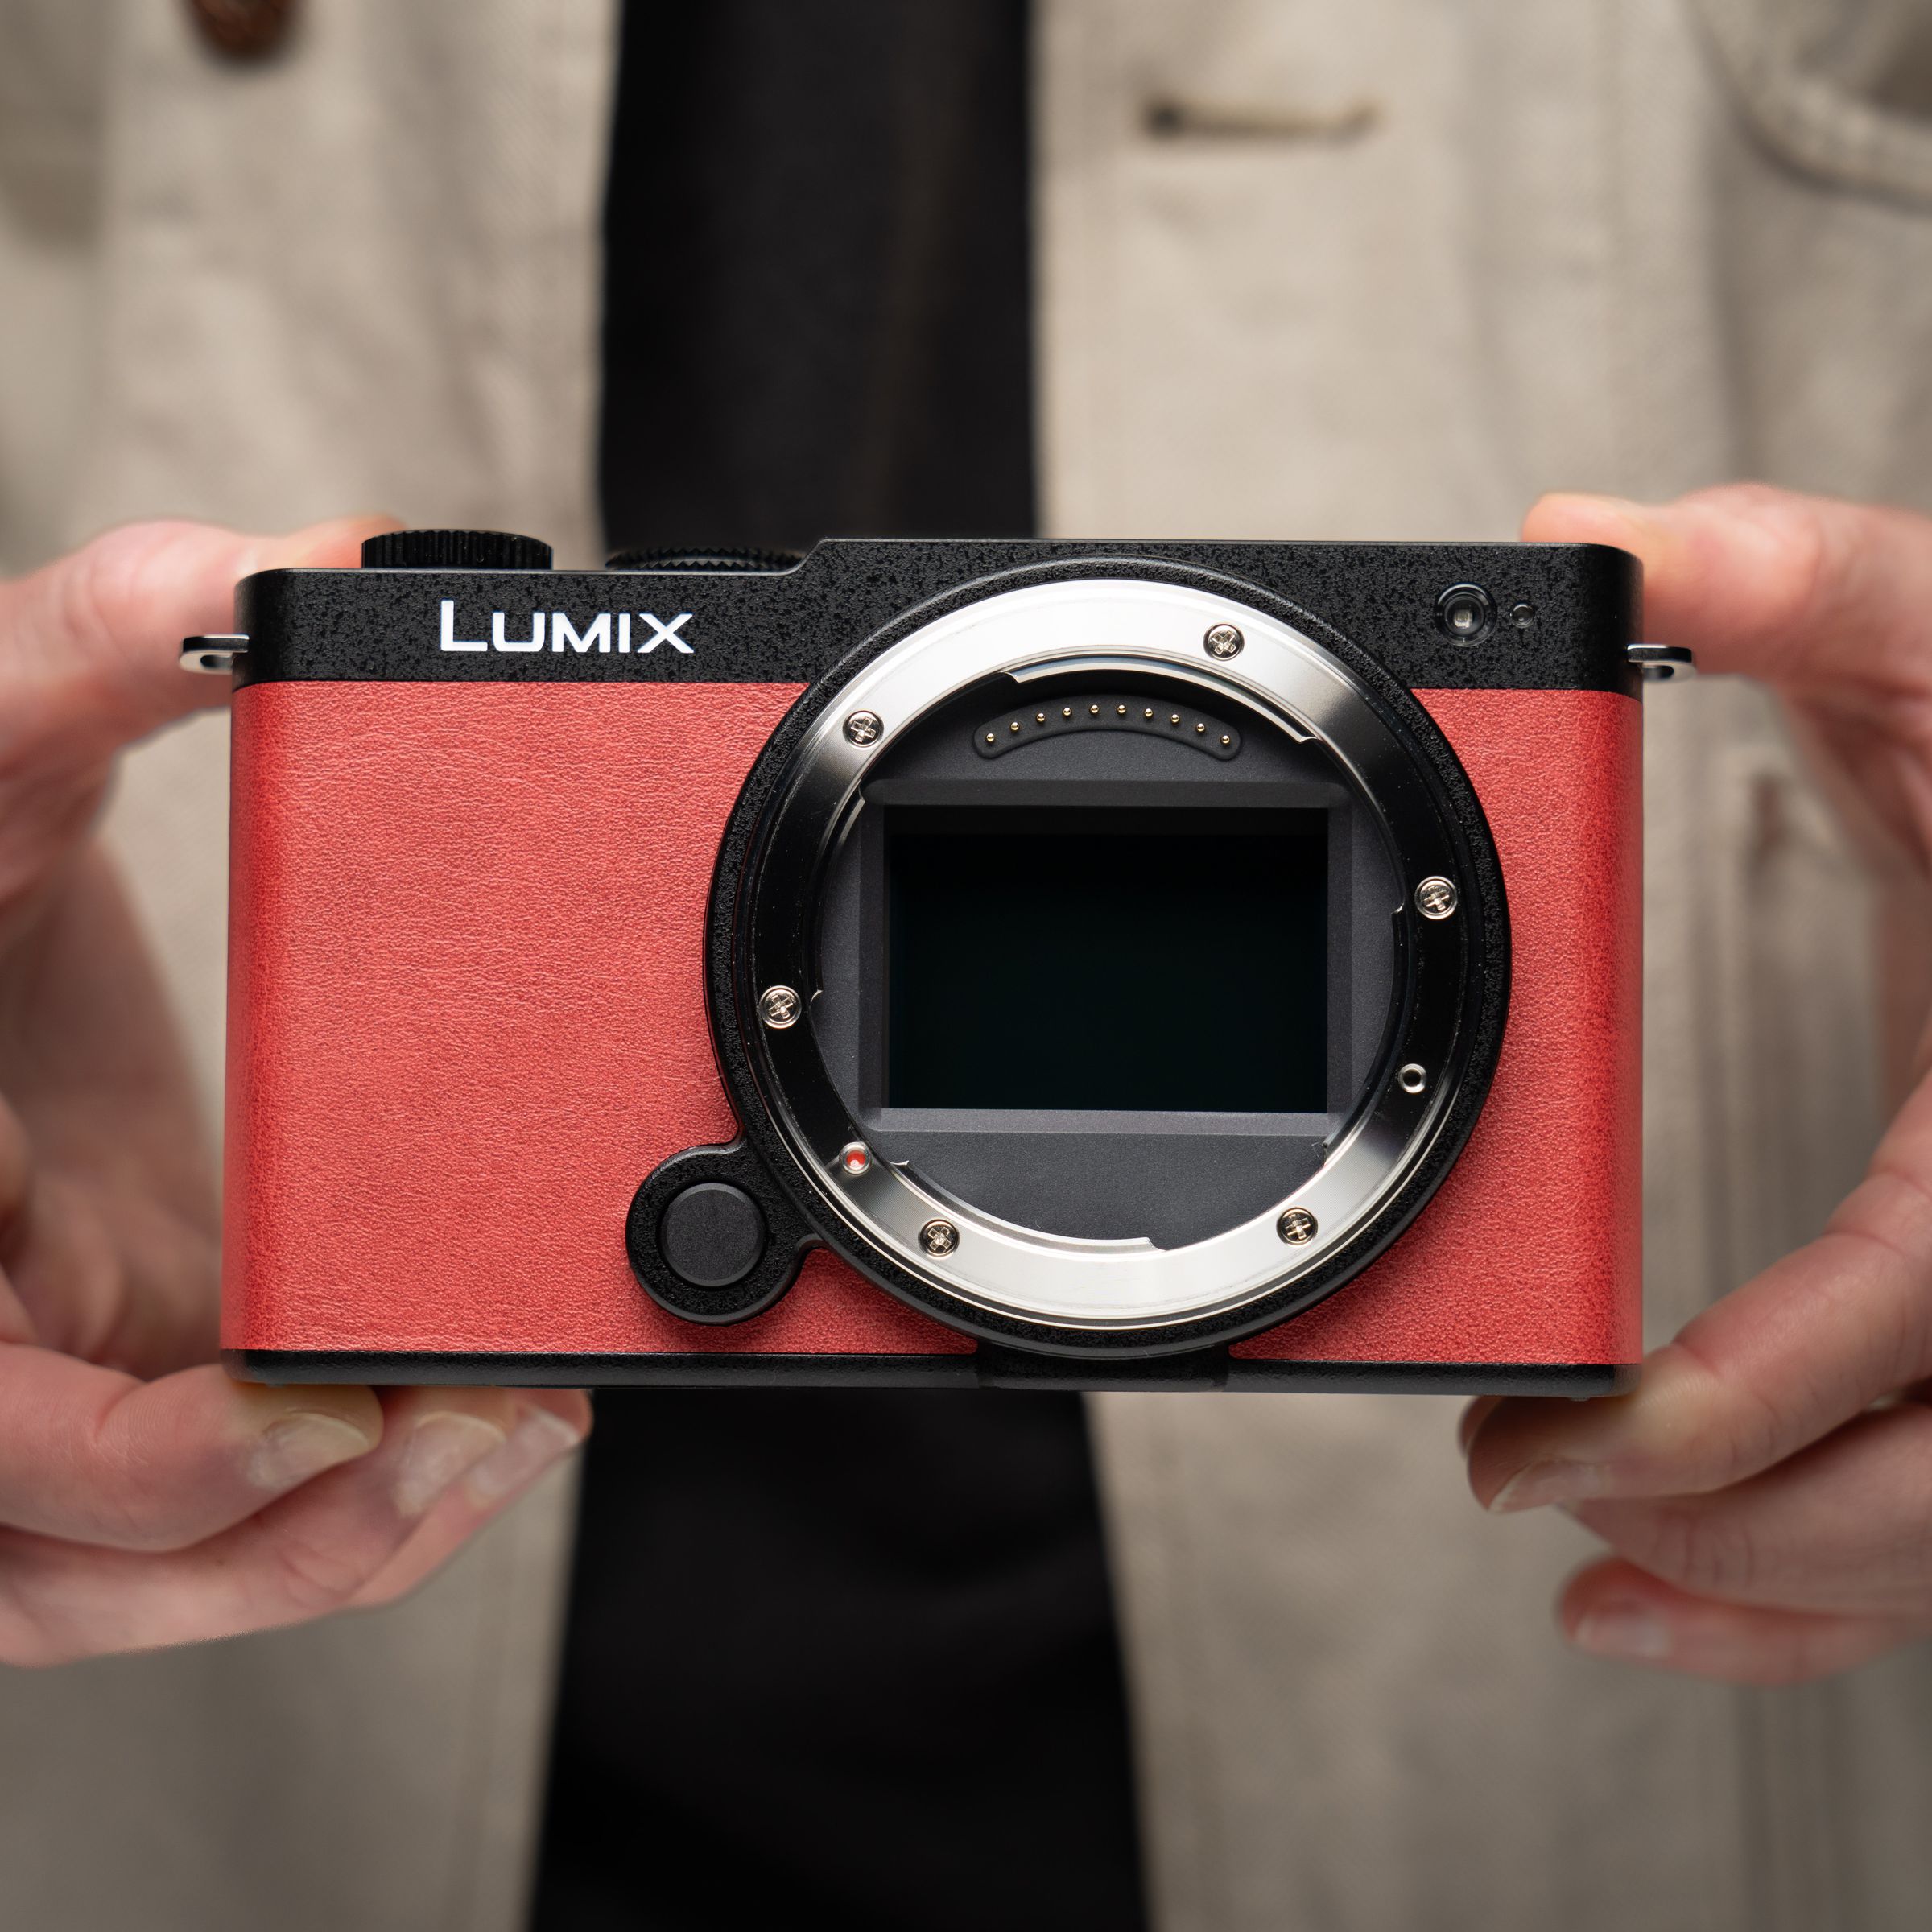 The Panasonic Lumix S9 is a new $1,500 full-frame camera that comes in four colors.